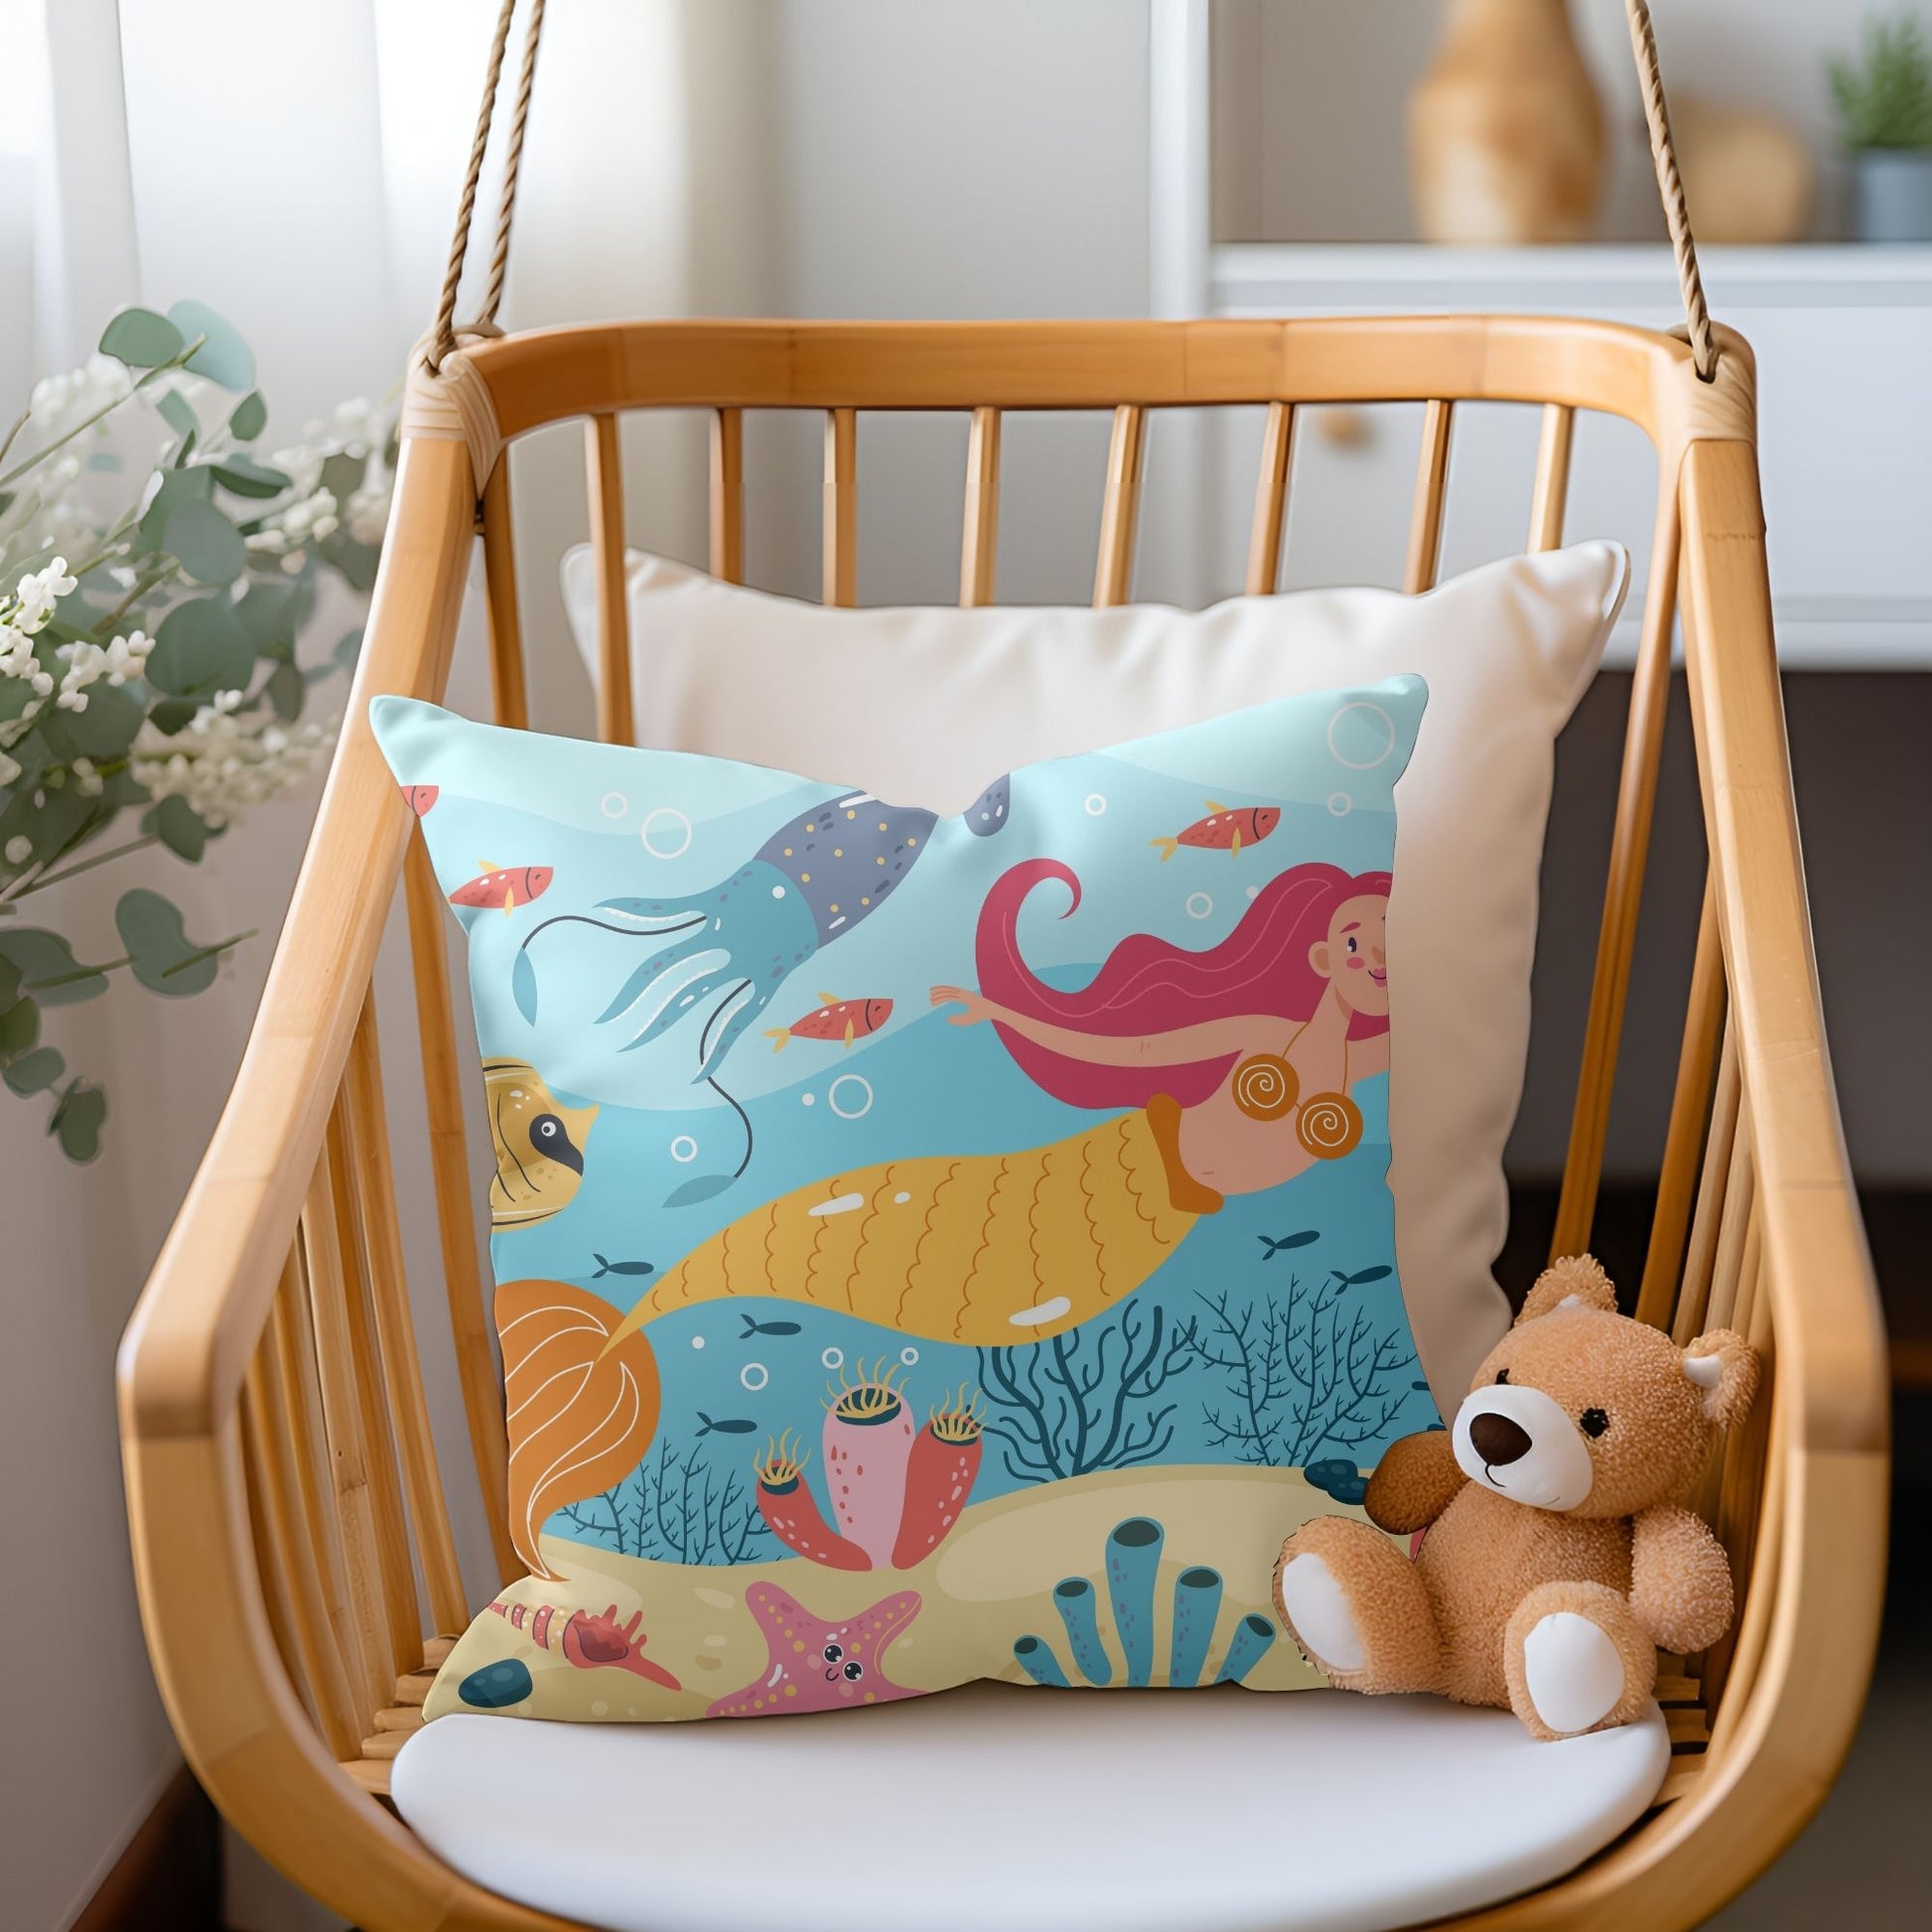 Sweet mermaid baby pillow for snuggles in the nursery.